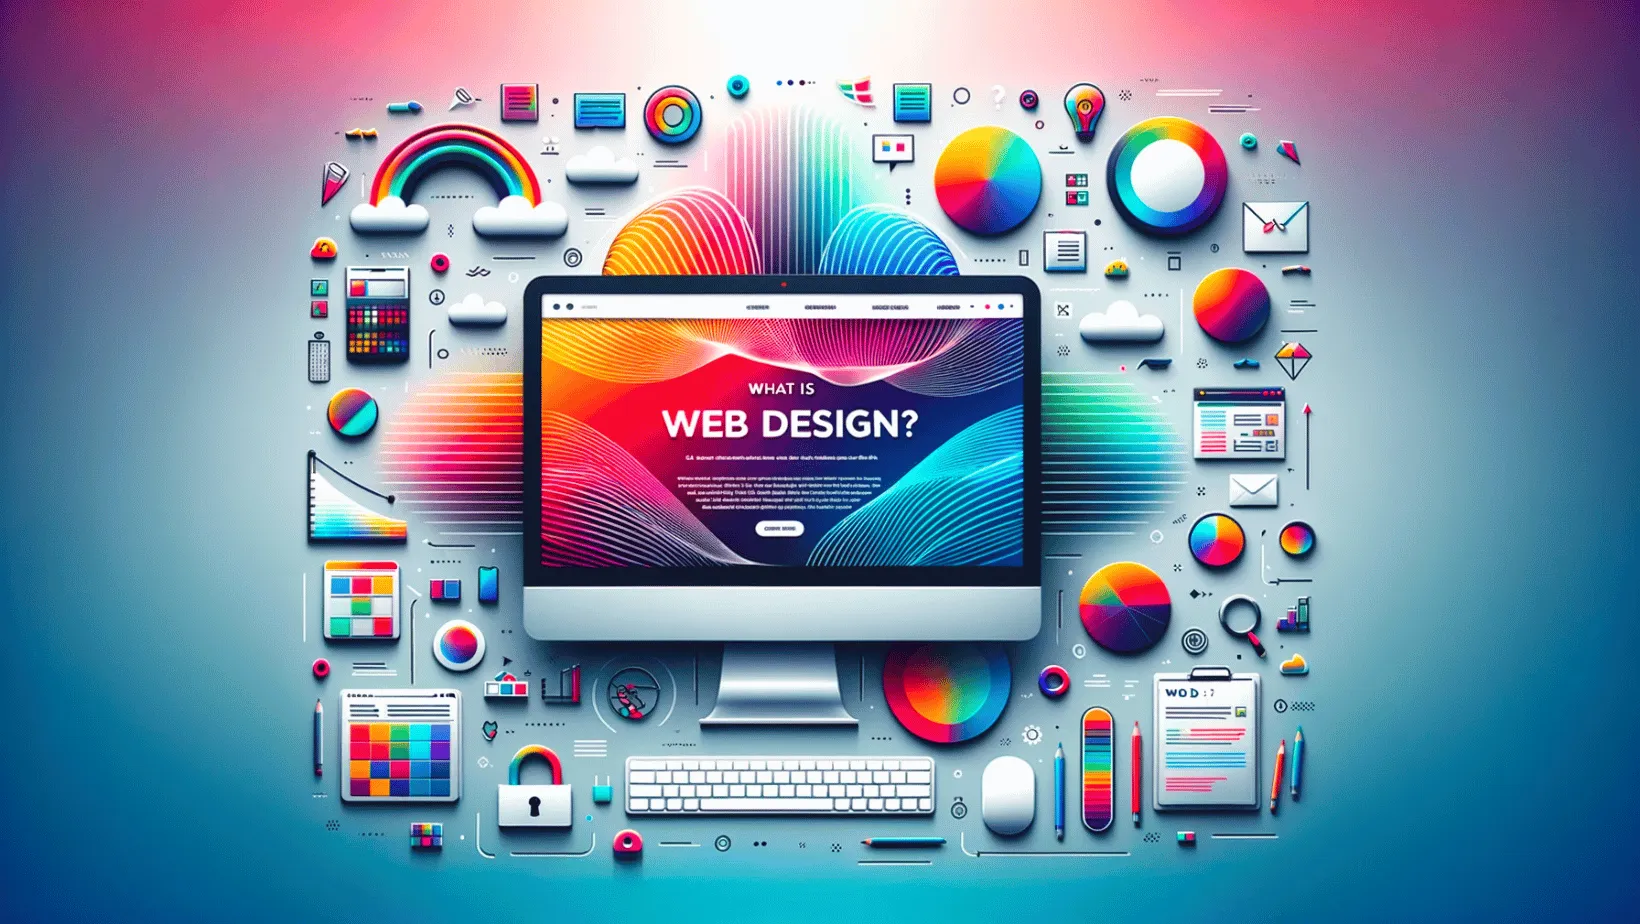 How to Choose an Attractive Web Design for Your Website